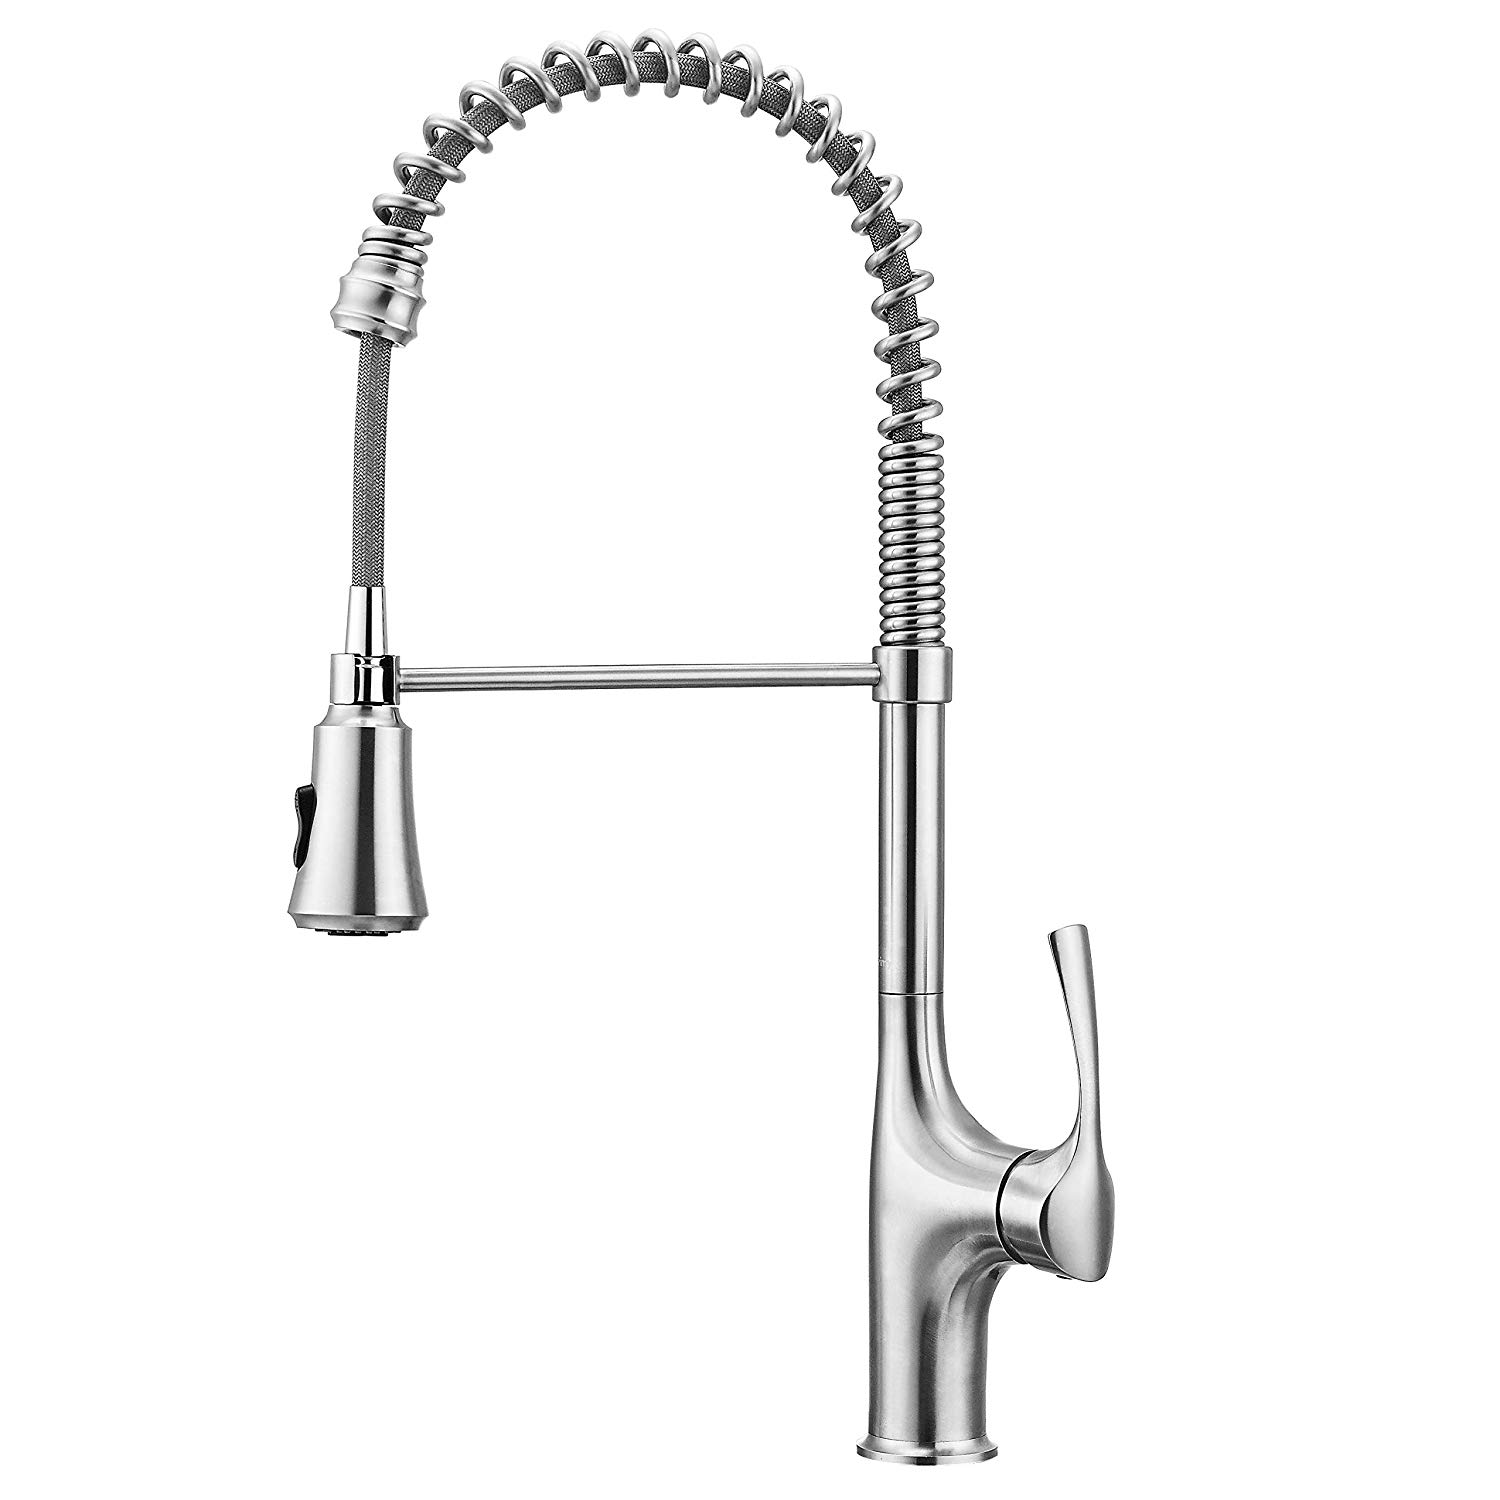 Primy Commercial Kitchen Faucet with Pull Down Sprayer